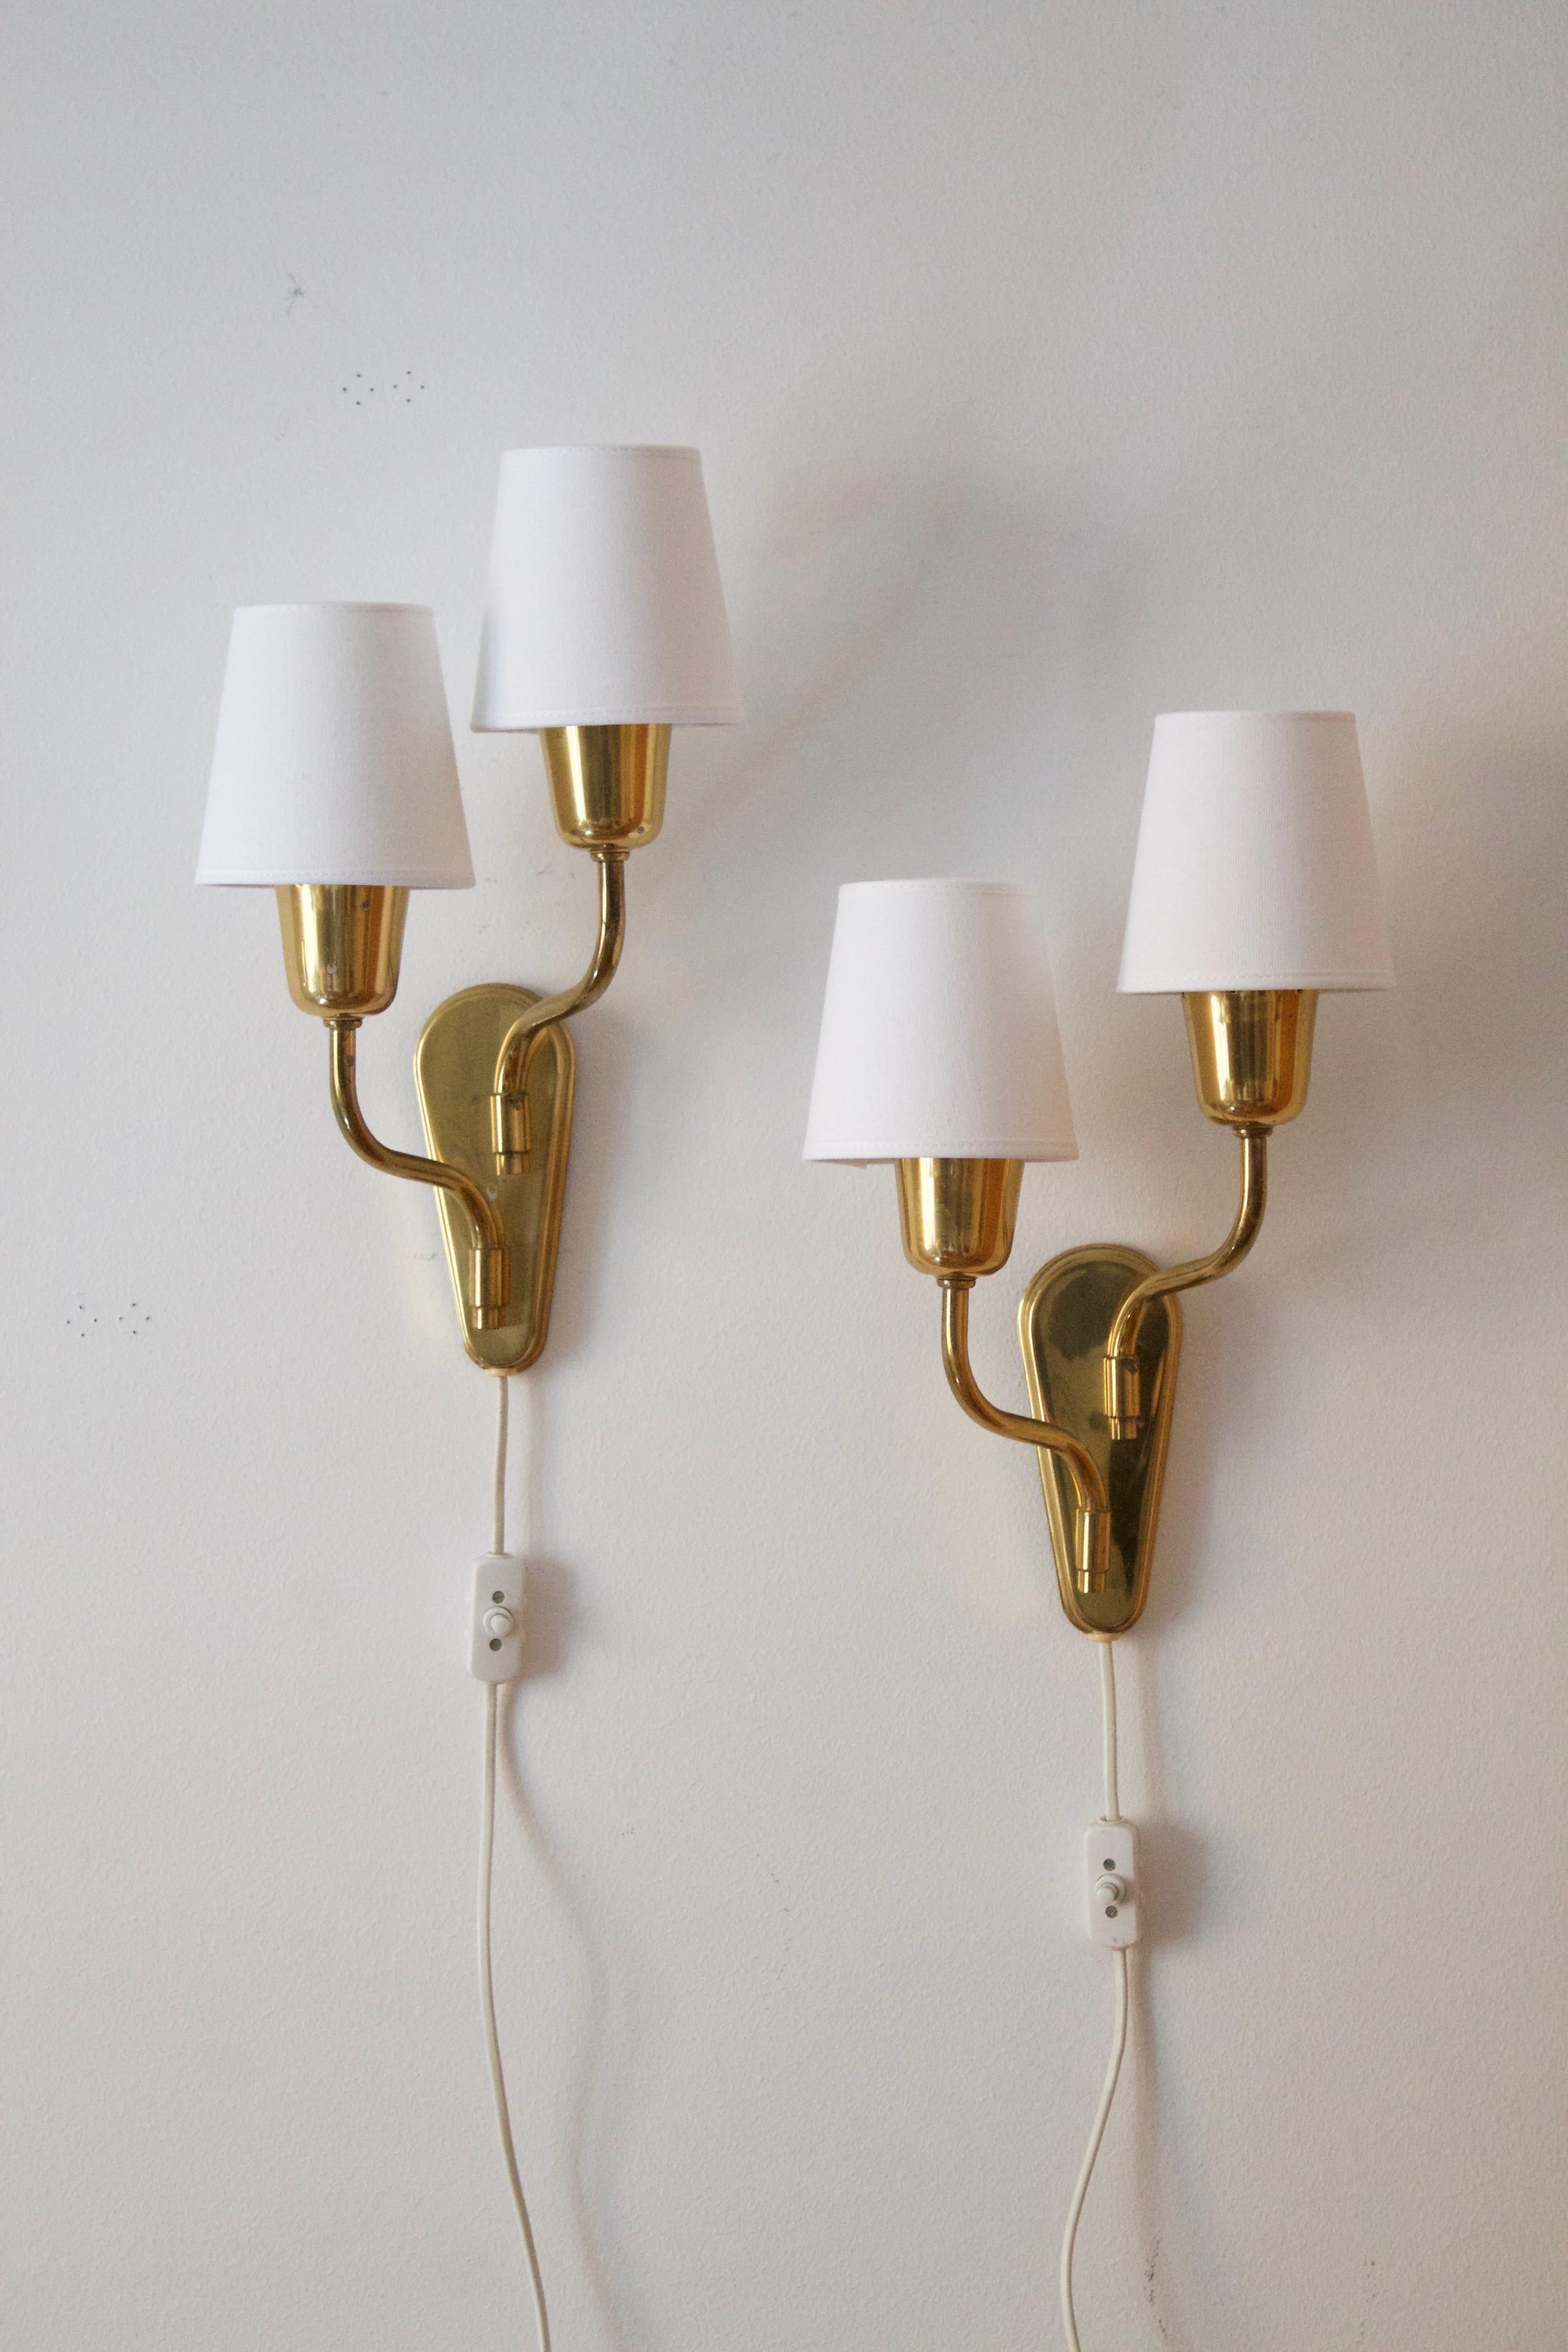 A two armed wall lights / sconces. Designed and produced in Sweden, c. 1950s.

Brand new high-end lampshades.

Other designers of the period include Paavo Tynell, Jean Royère, Hans Bergström, Hans-Agne Jakobsson, and Kaare Klint.